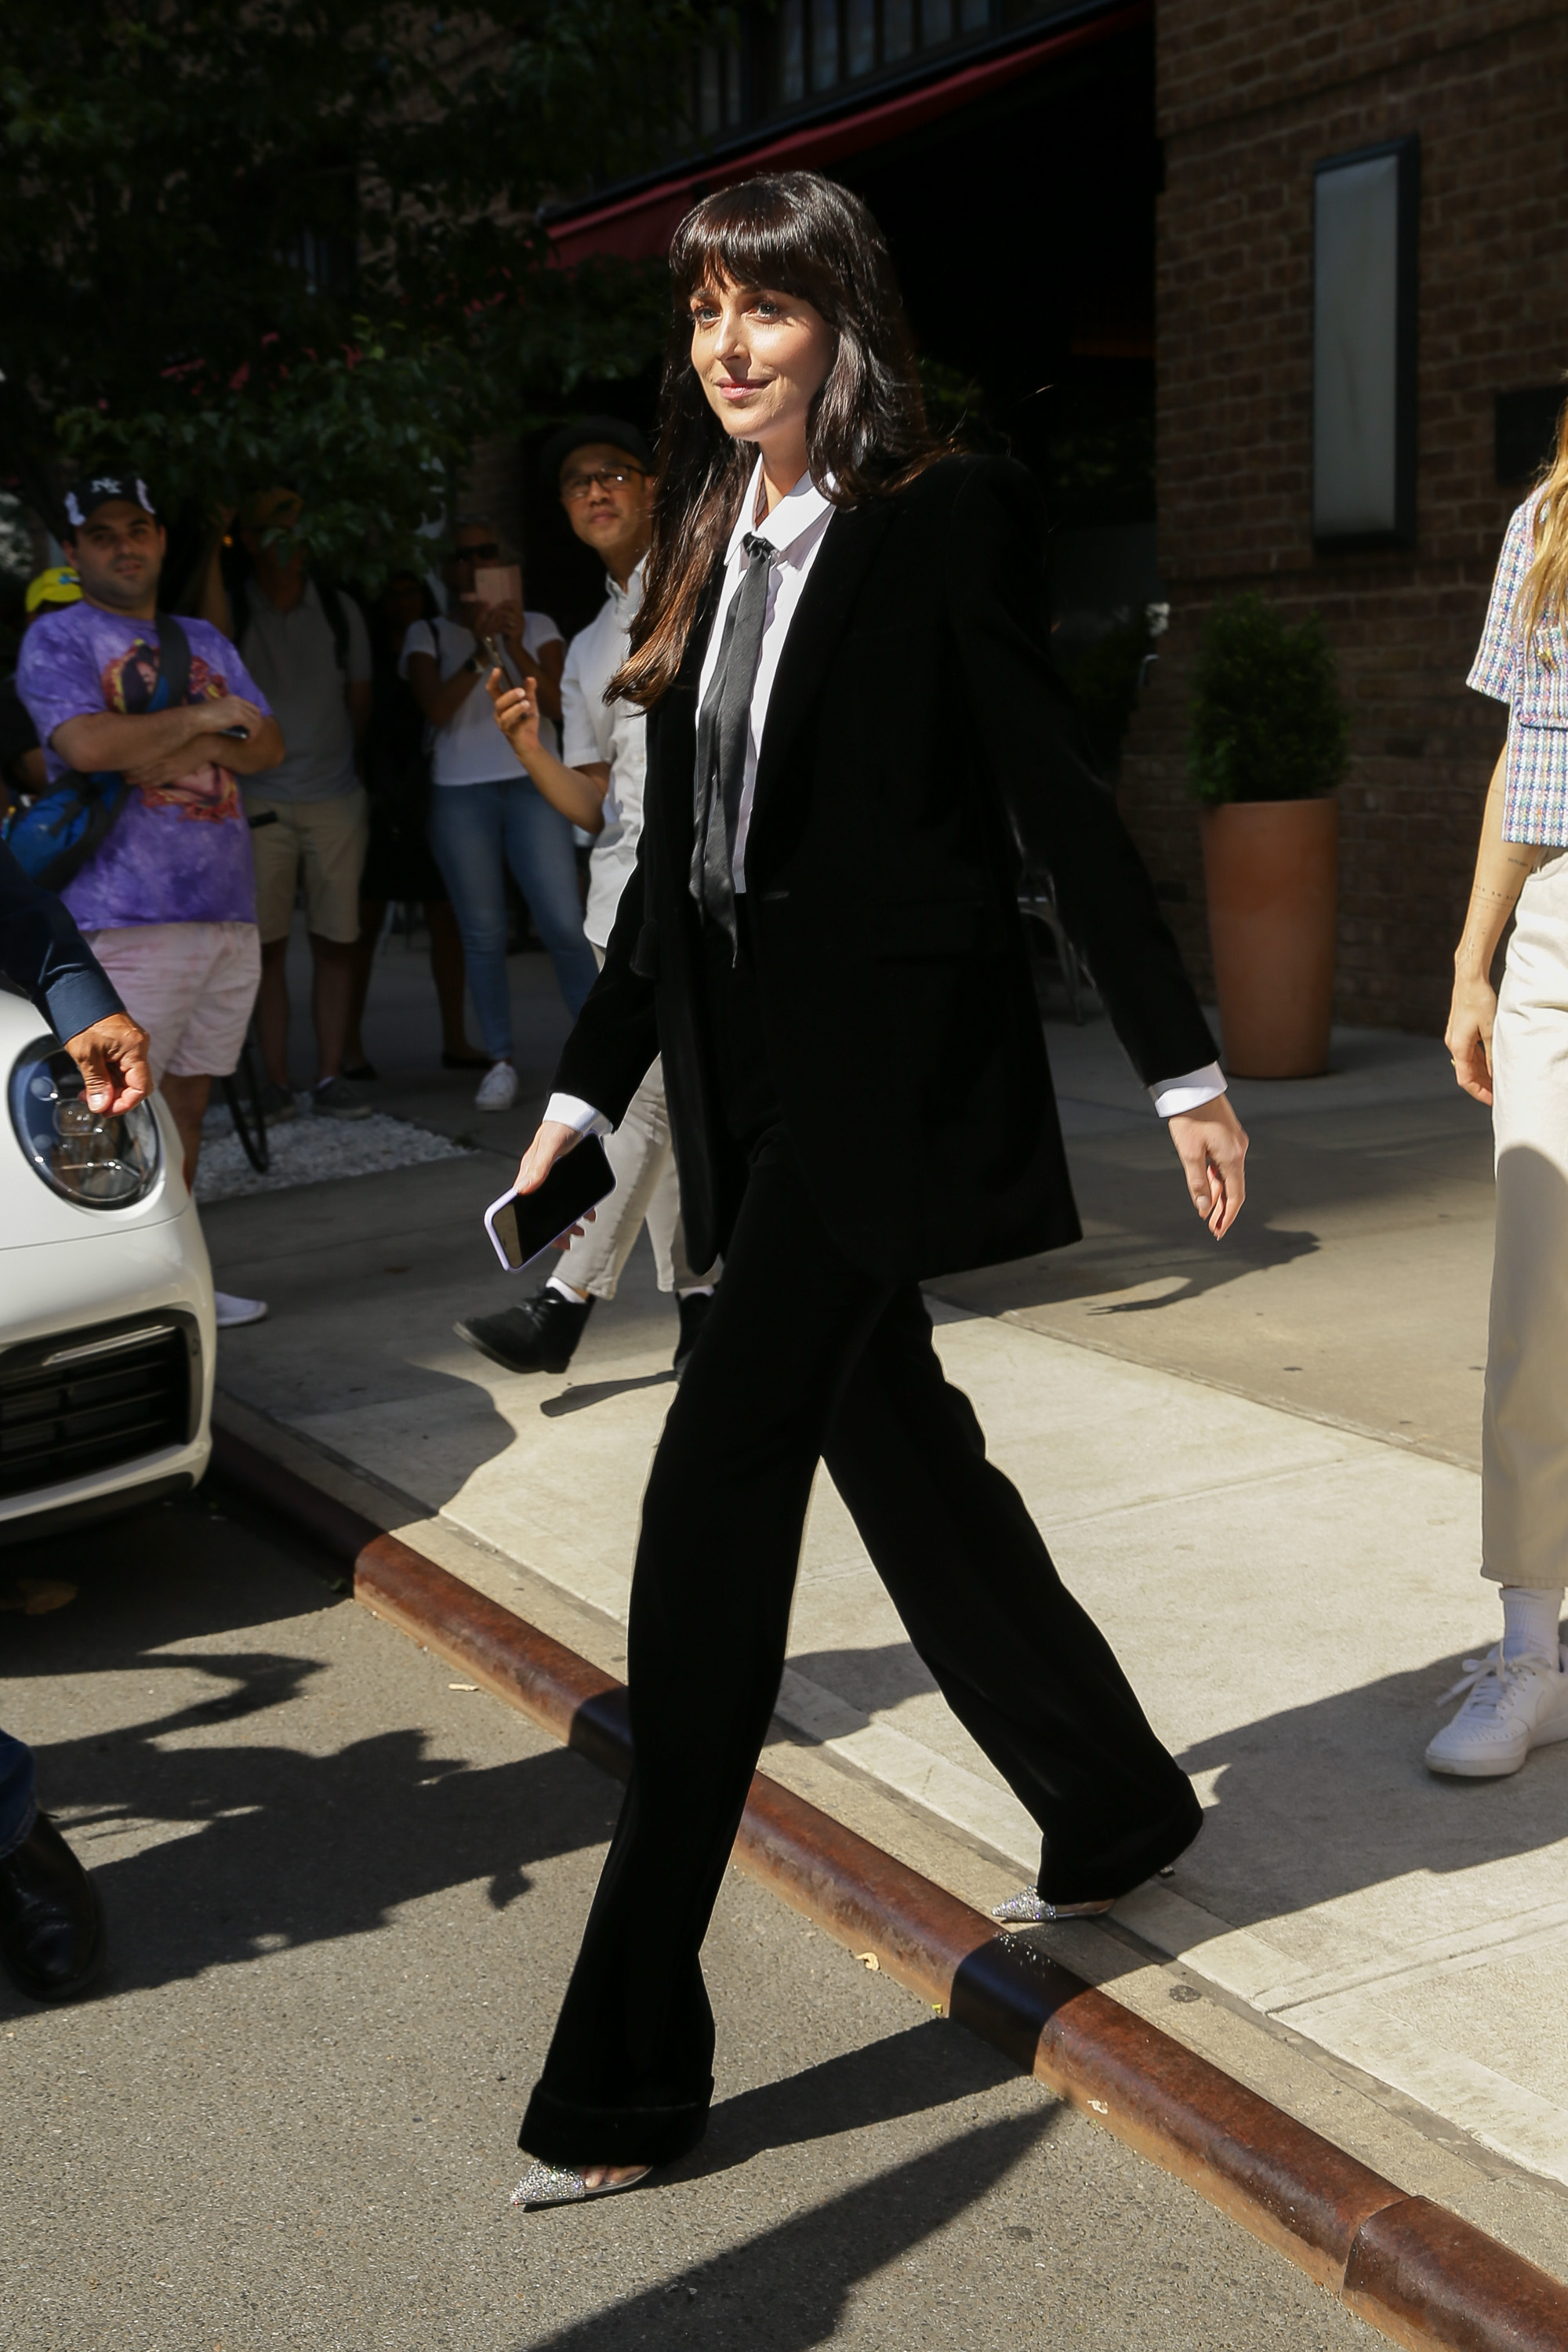 Dakota Johnson was photographed as she greeted fans waiting for her outside her hotel in New York.  The actress wore a black suit with a shirt and bow